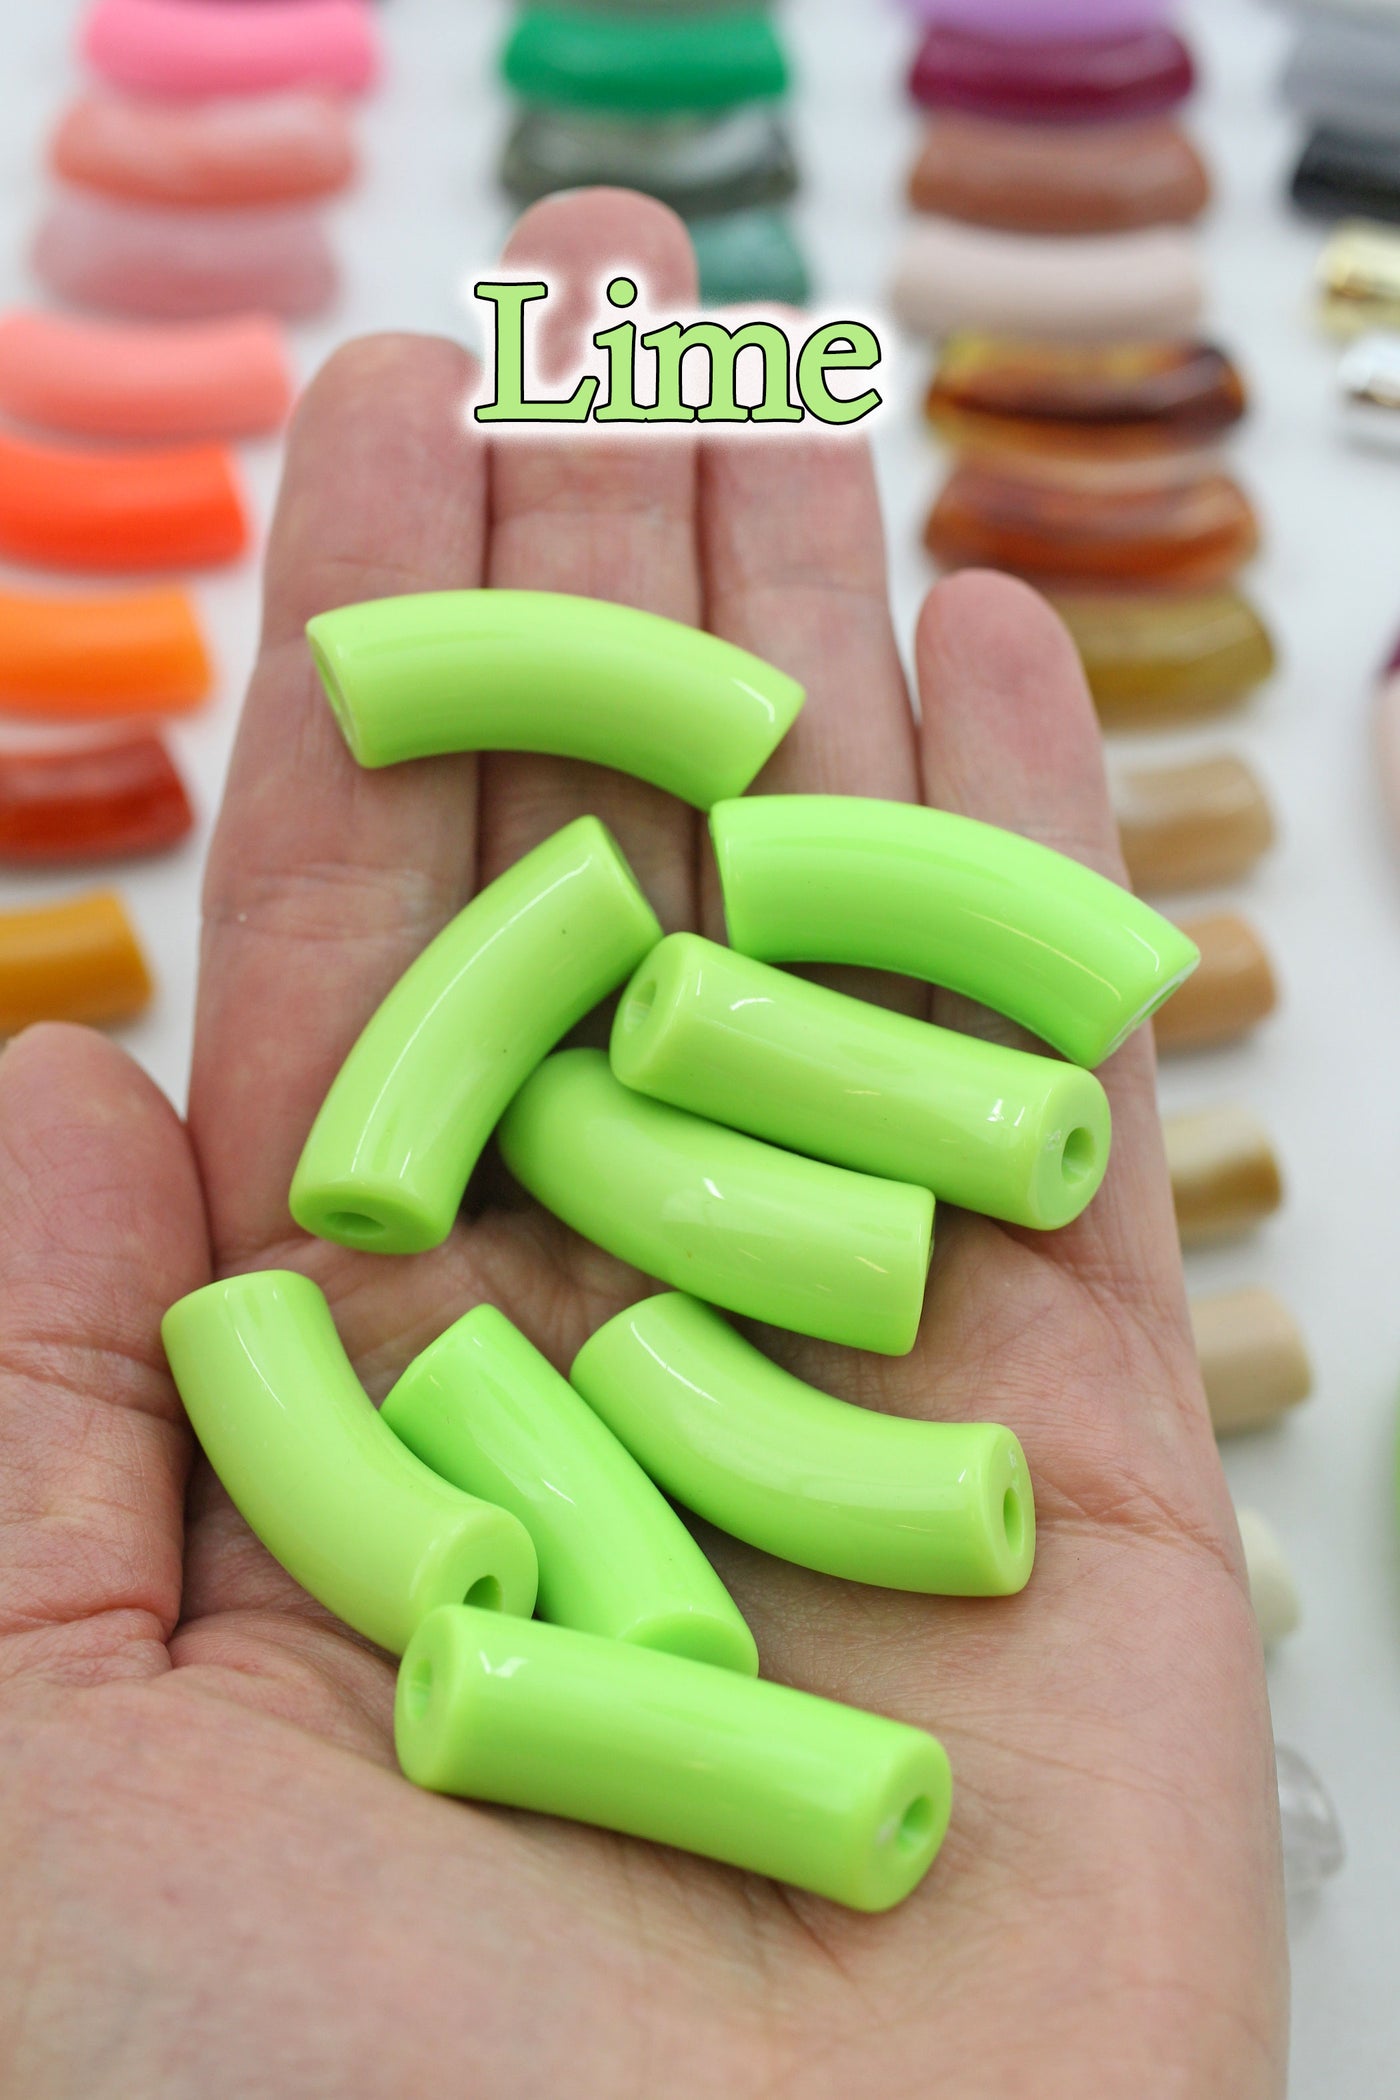 Lime Acrylic Bamboo Beads, Curved Tube Beads, 12mm Colorful Bangle Beads